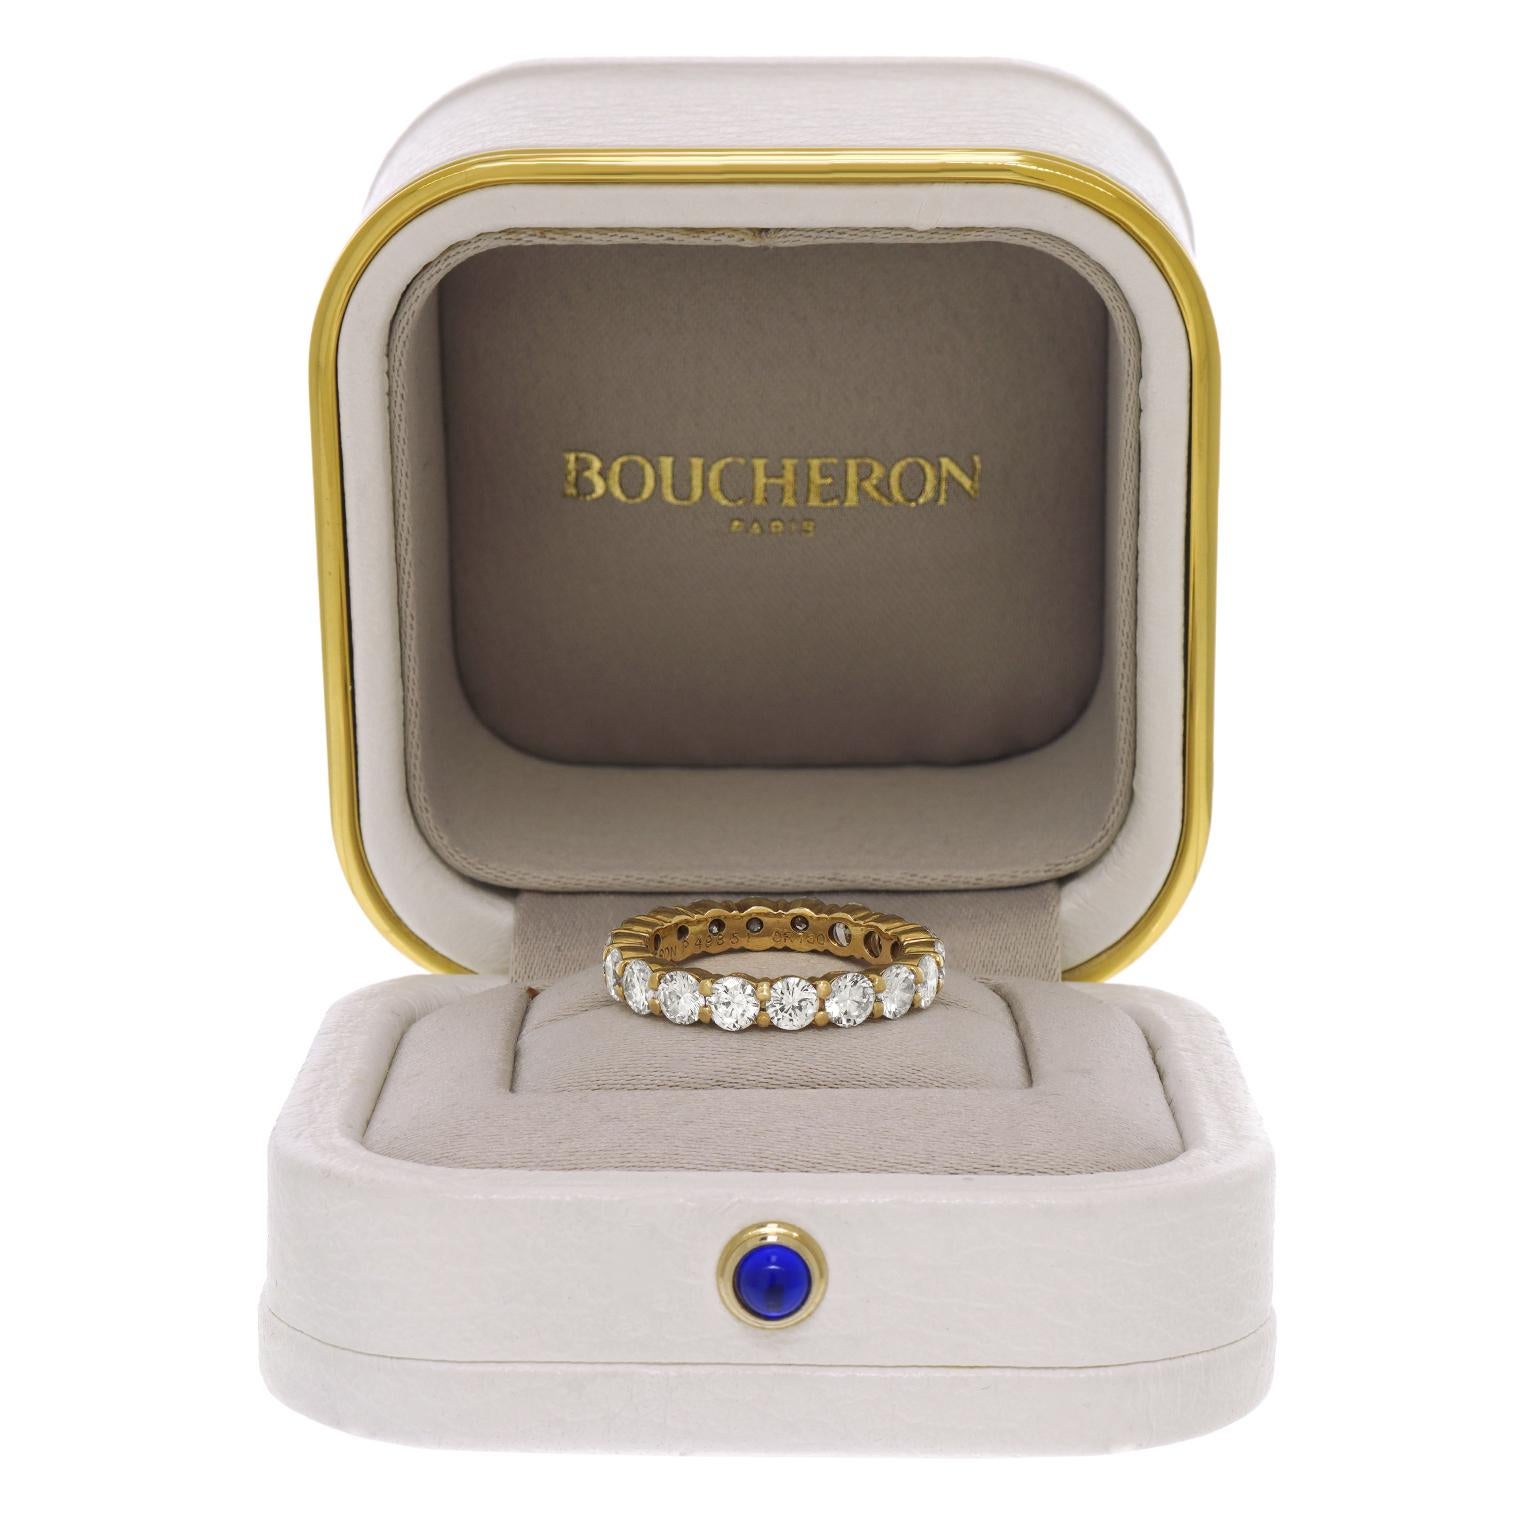 Boucheron Yellow Gold Eternity Band In Excellent Condition For Sale In Litchfield, CT